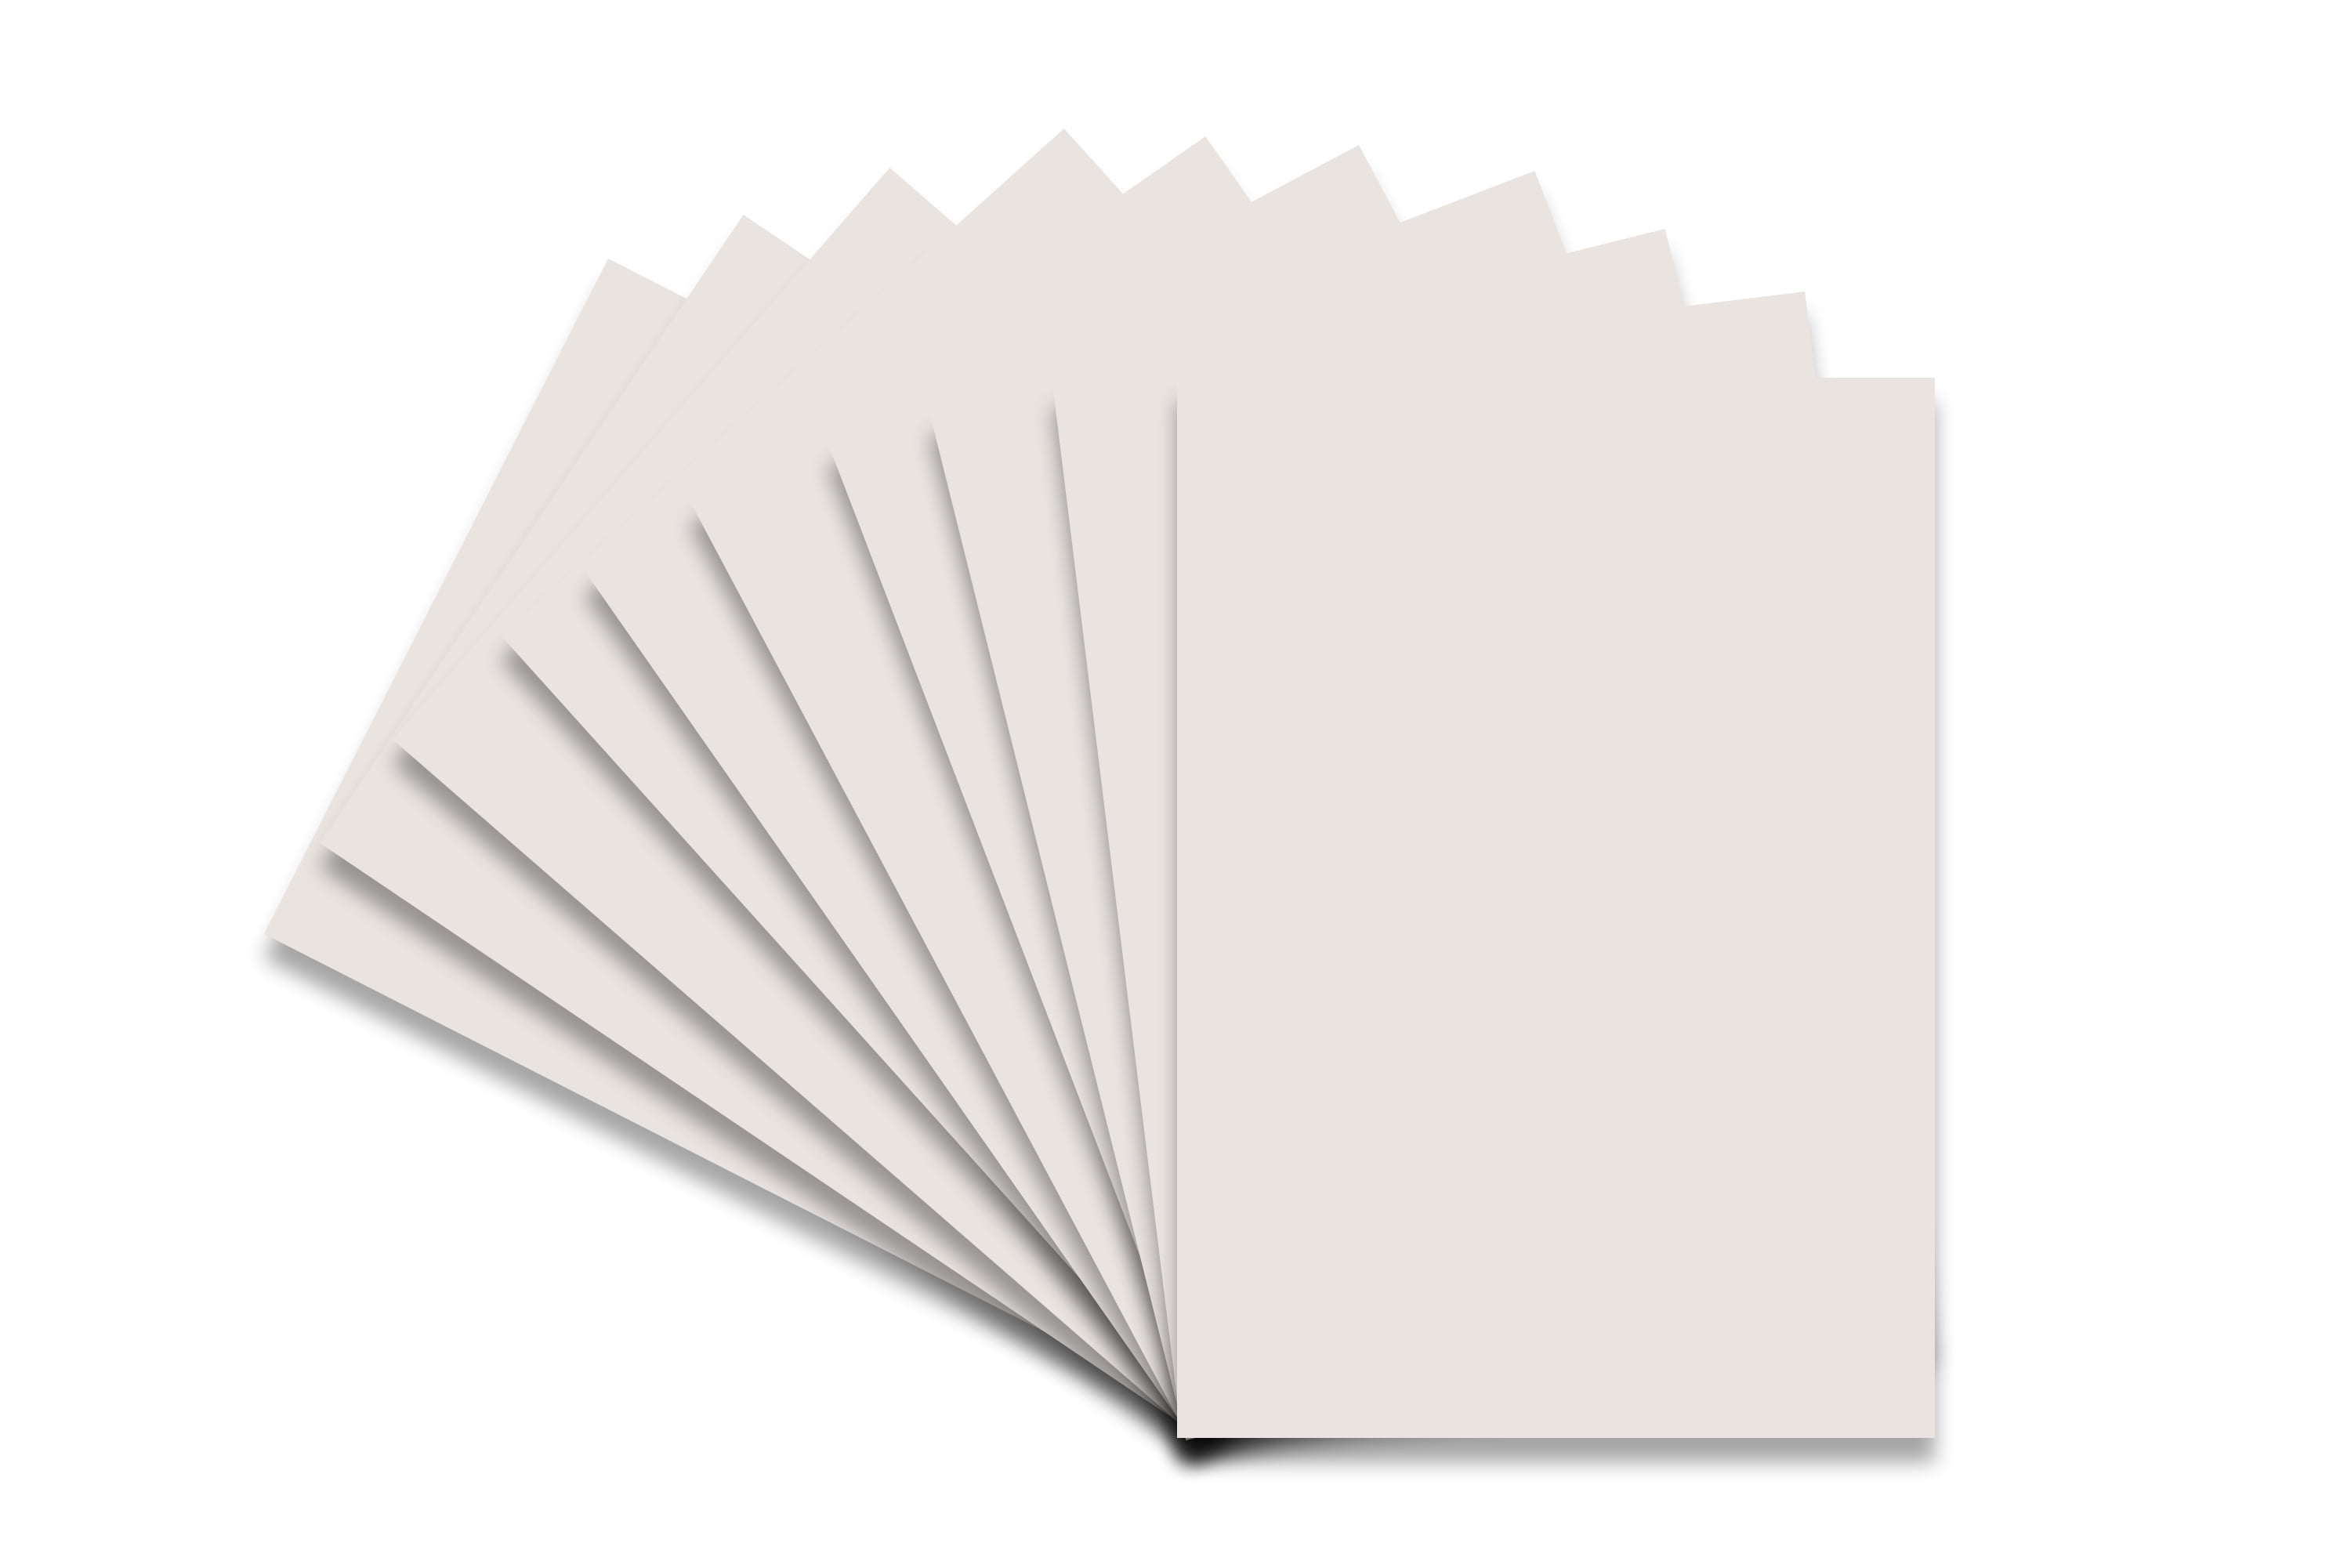 Archival Methods 4-ply Pearl White Conservation Mat Board (11 x 14, 25 Boards)